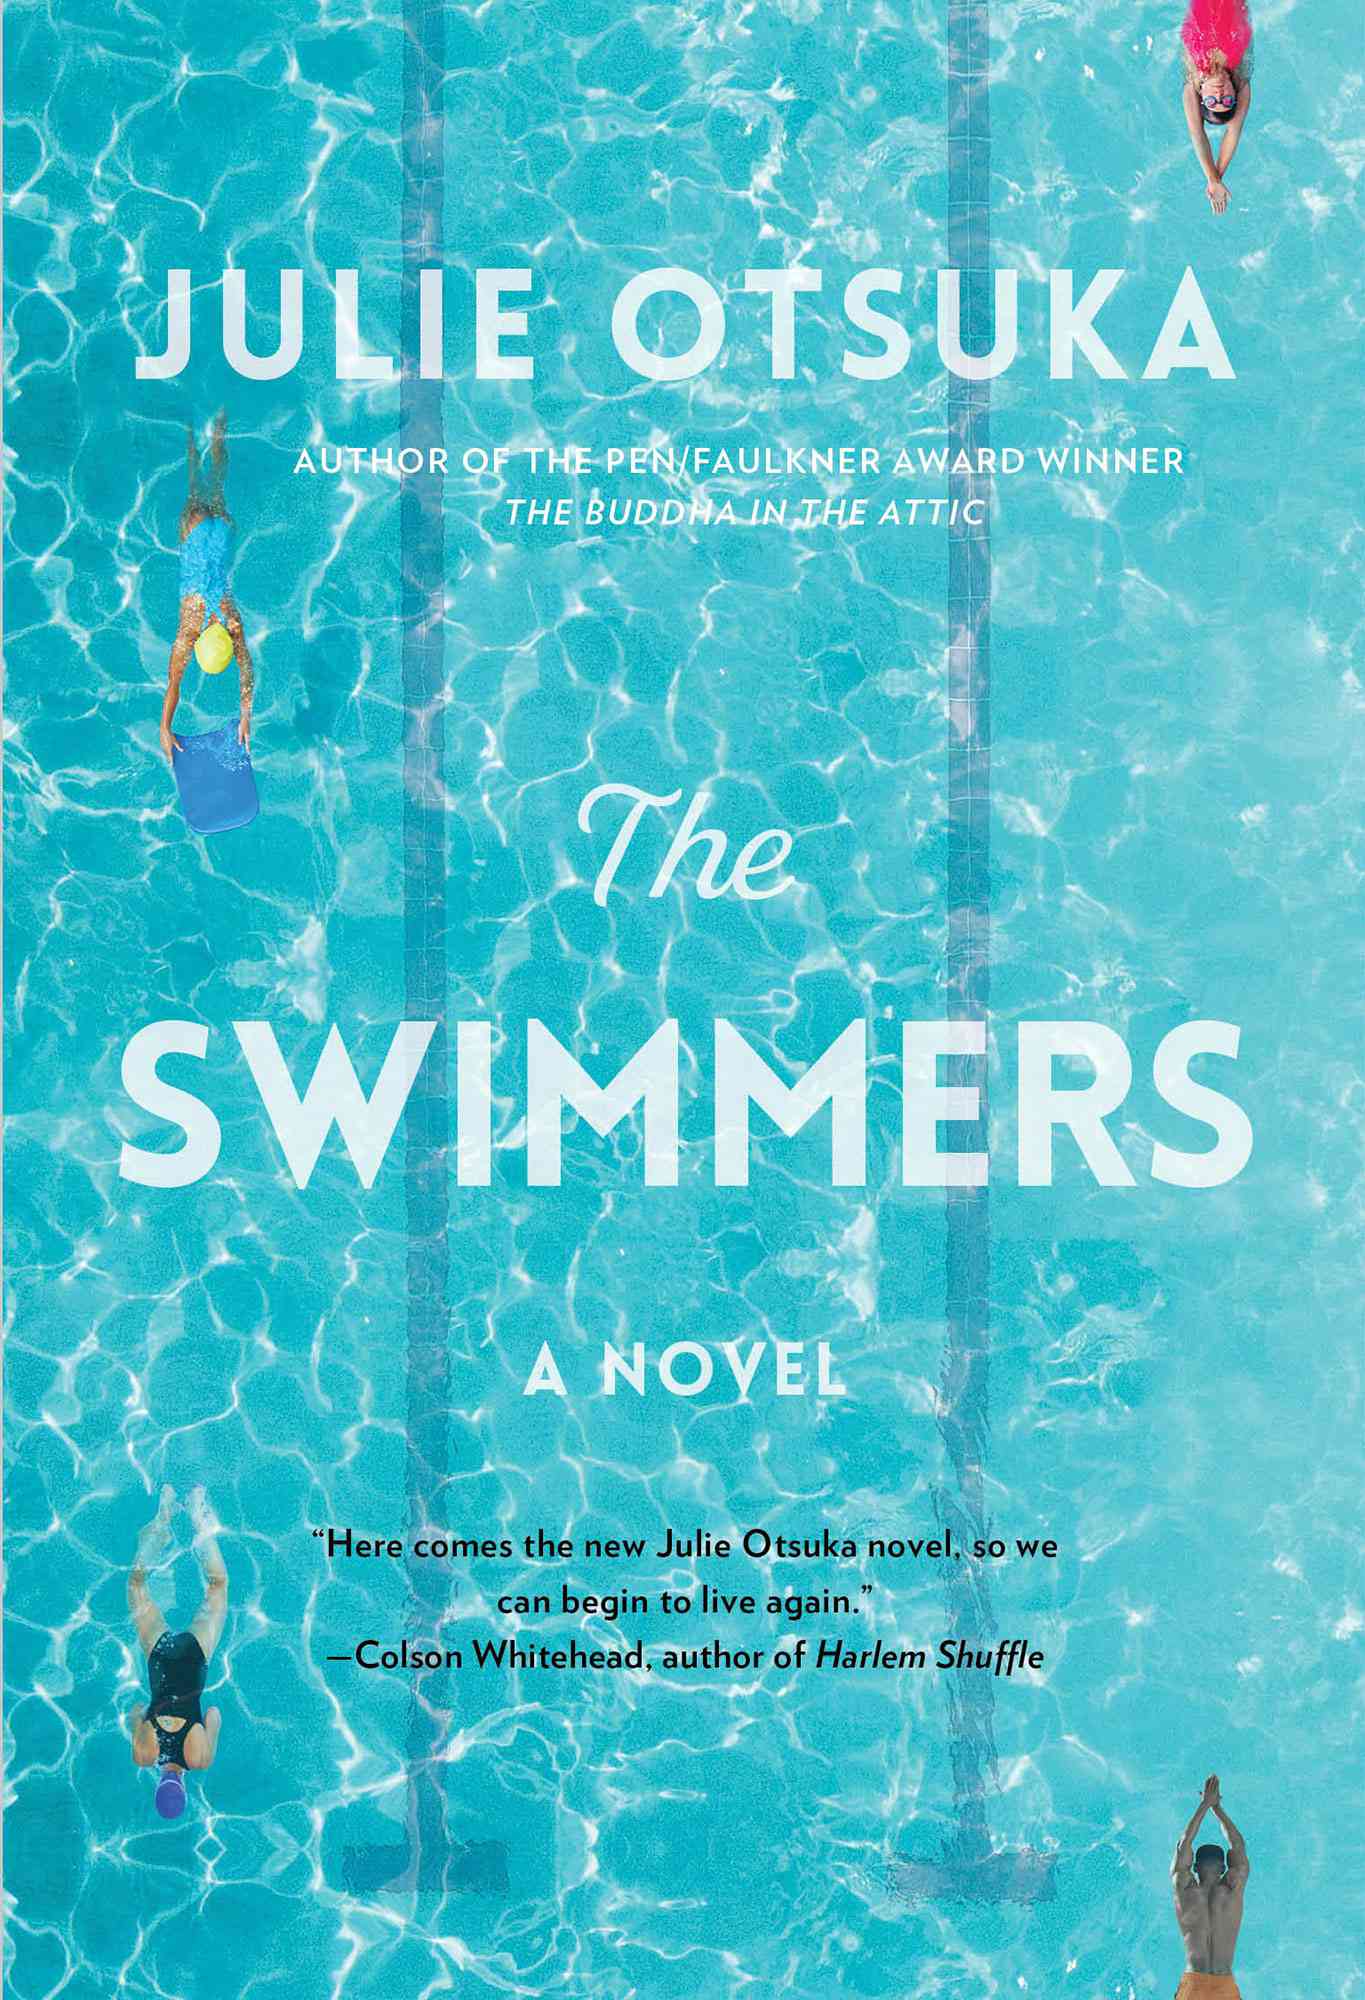 The Swimmers, by Julie Otsuka